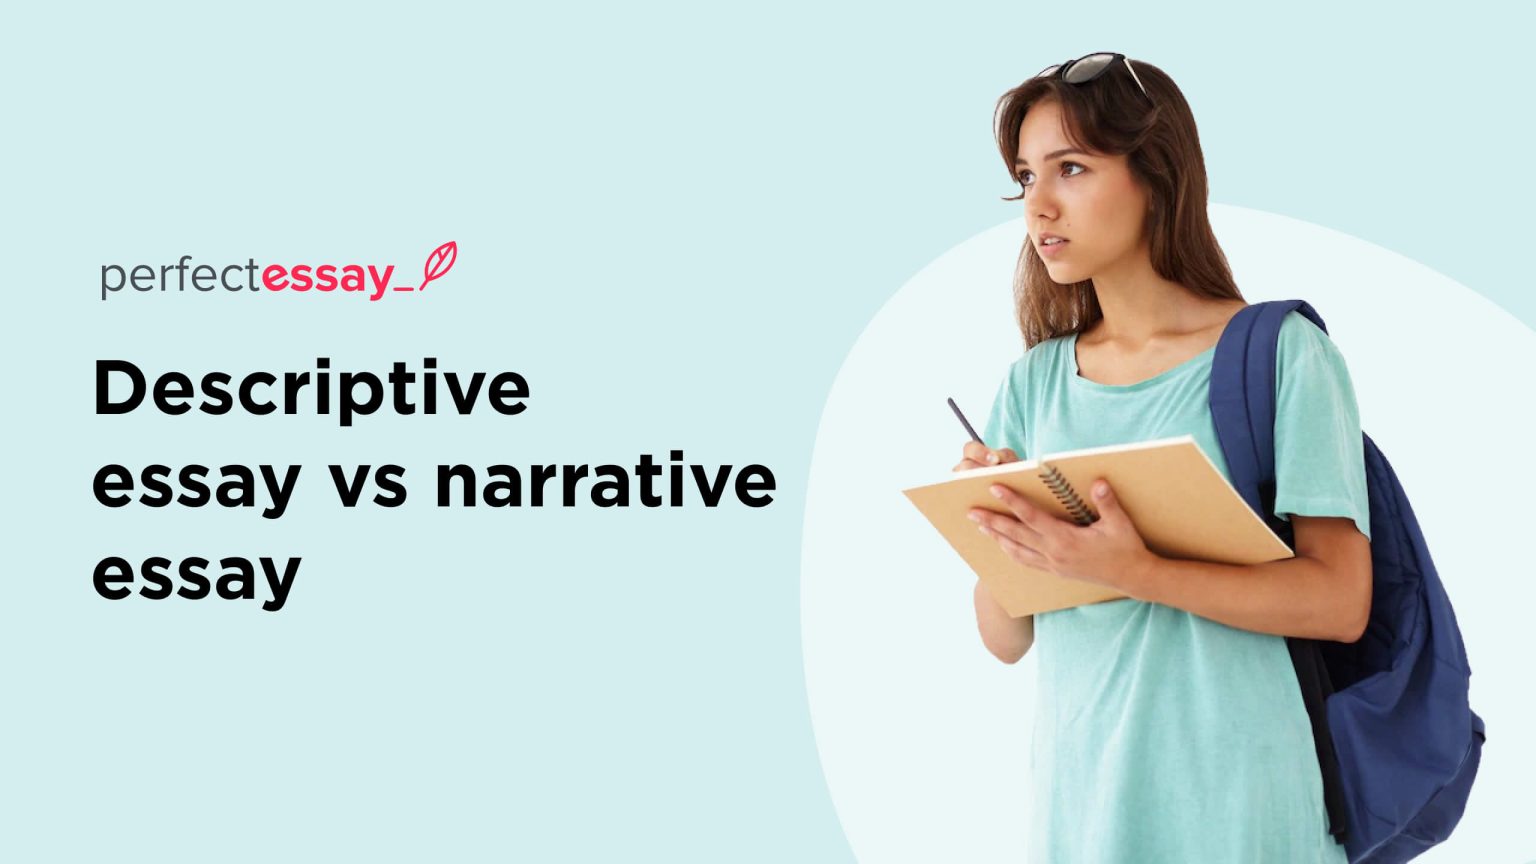 what is the difference between narrative essay and descriptive essay